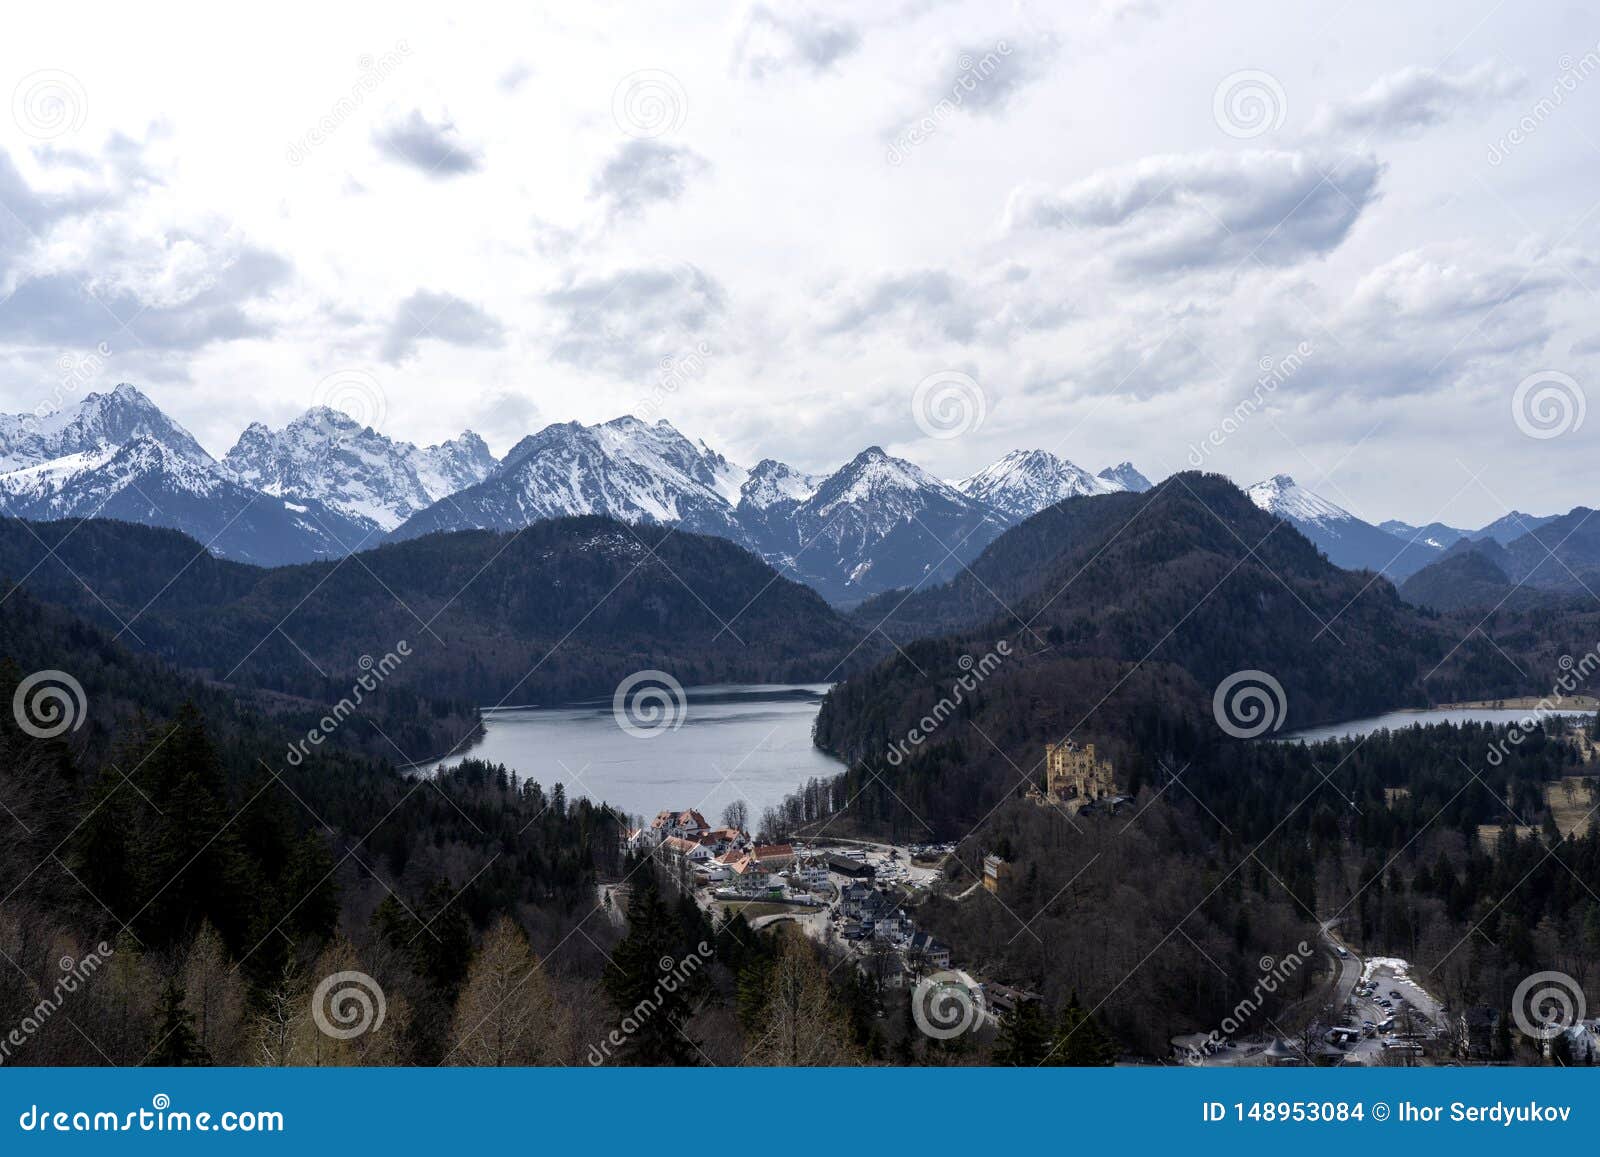 hohenschwangau castle, view from neuschwanstein castle, the famous viewpoint in fussen, germany - immagine